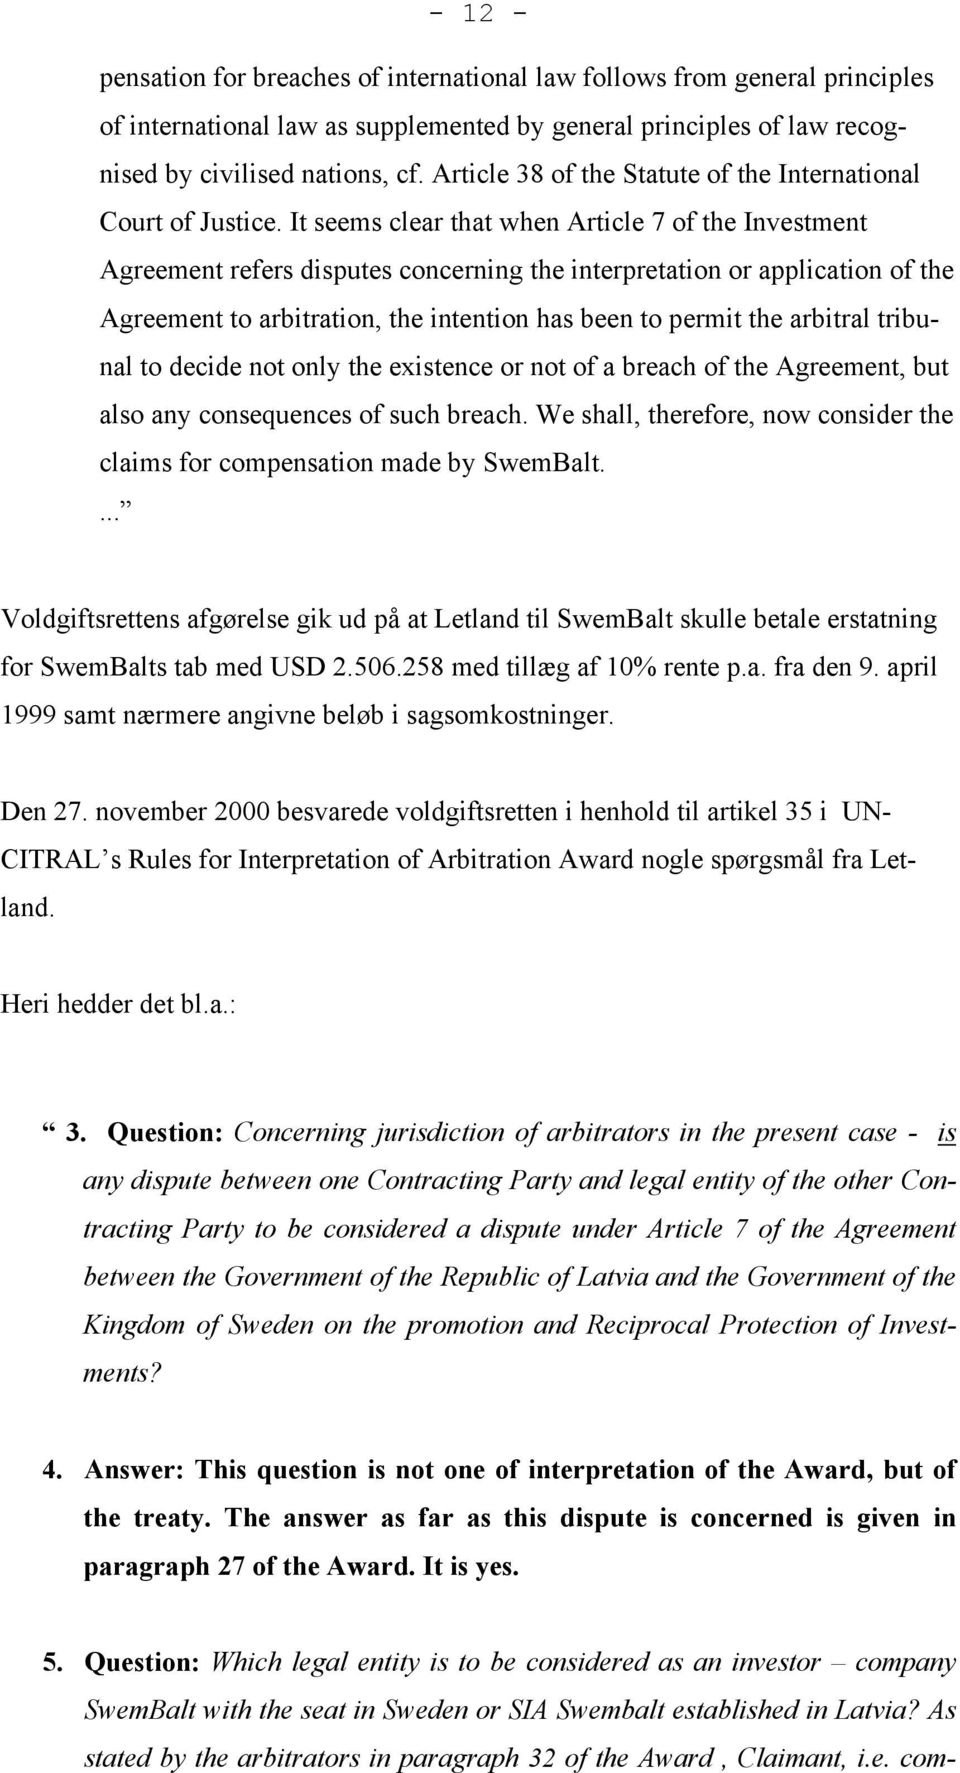 It seems clear that when Article 7 of the Investment Agreement refers disputes concerning the interpretation or application of the Agreement to arbitration, the intention has been to permit the